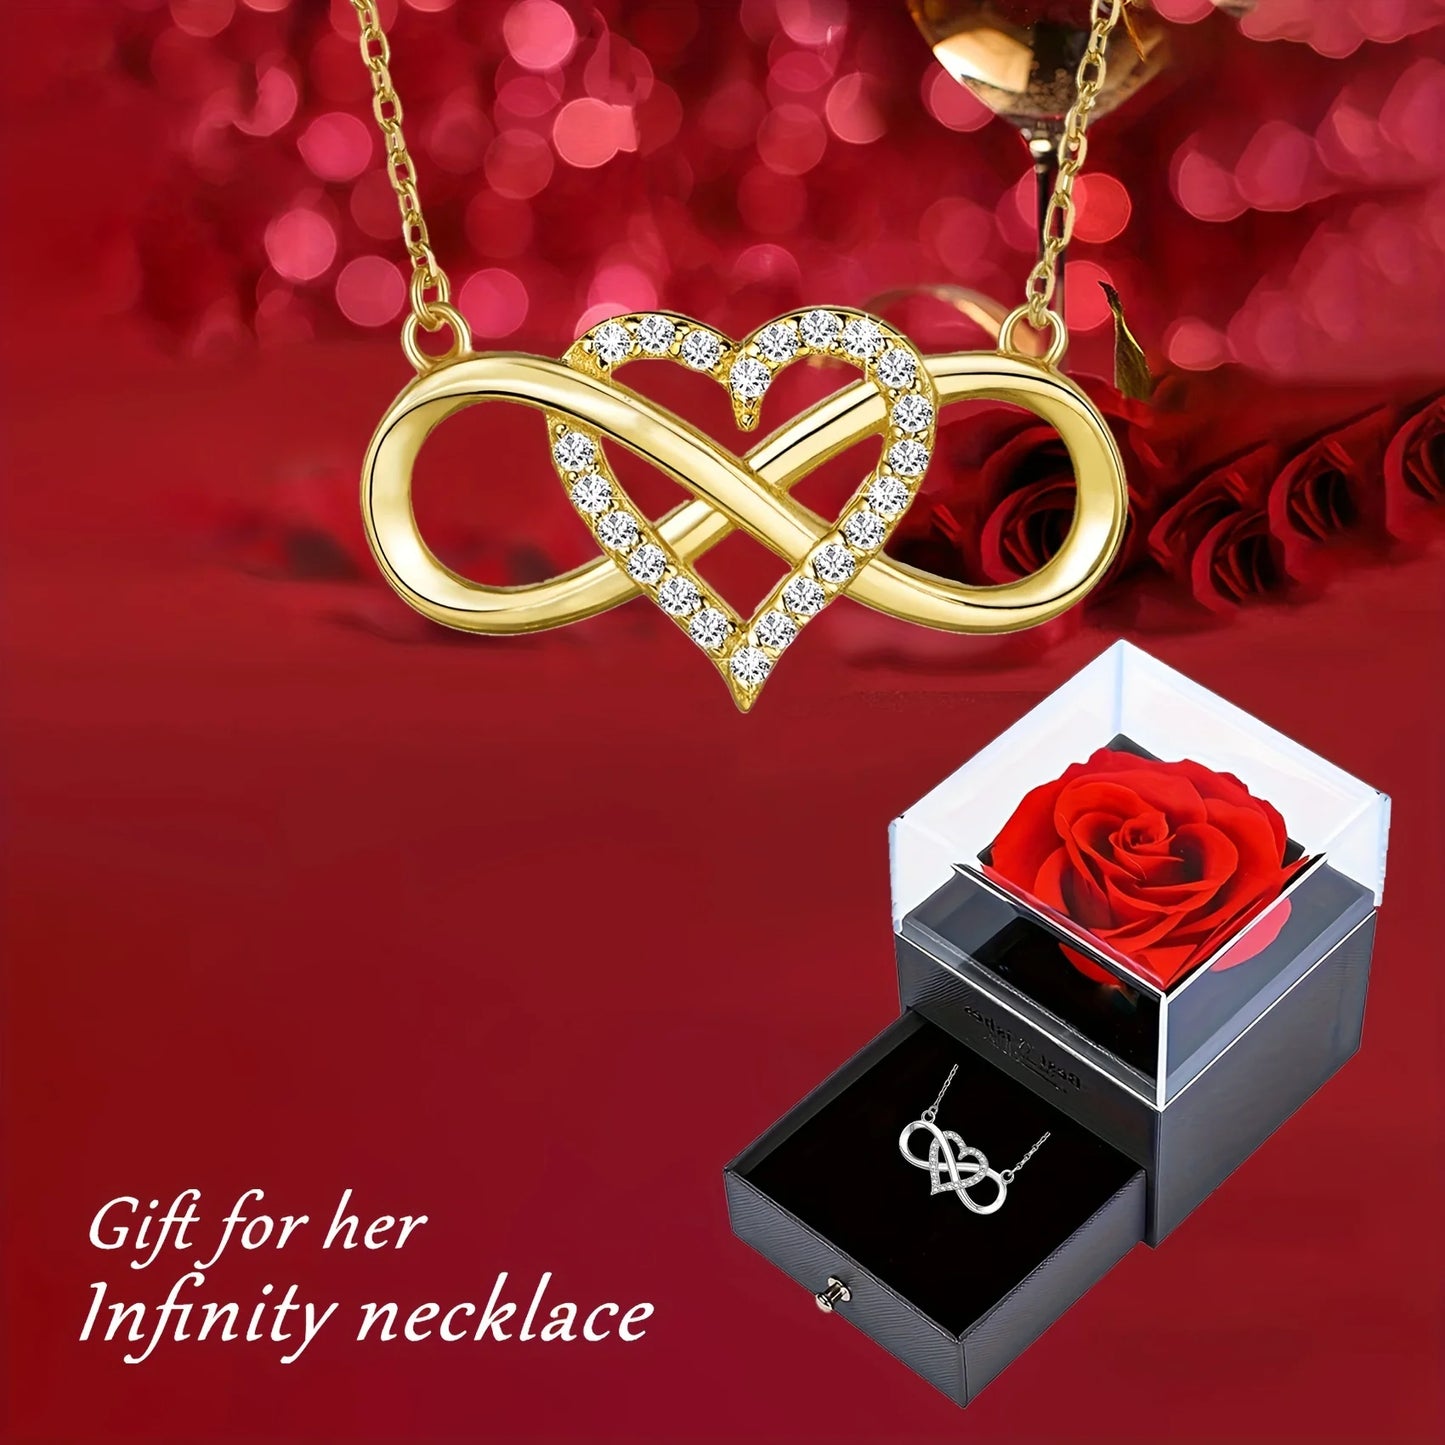 Elegant Infinity Heart Shape Pendant Necklace With Luxury Rose Gift Box For Girlfriend Wife Christmas Valentine Anniversary Gift